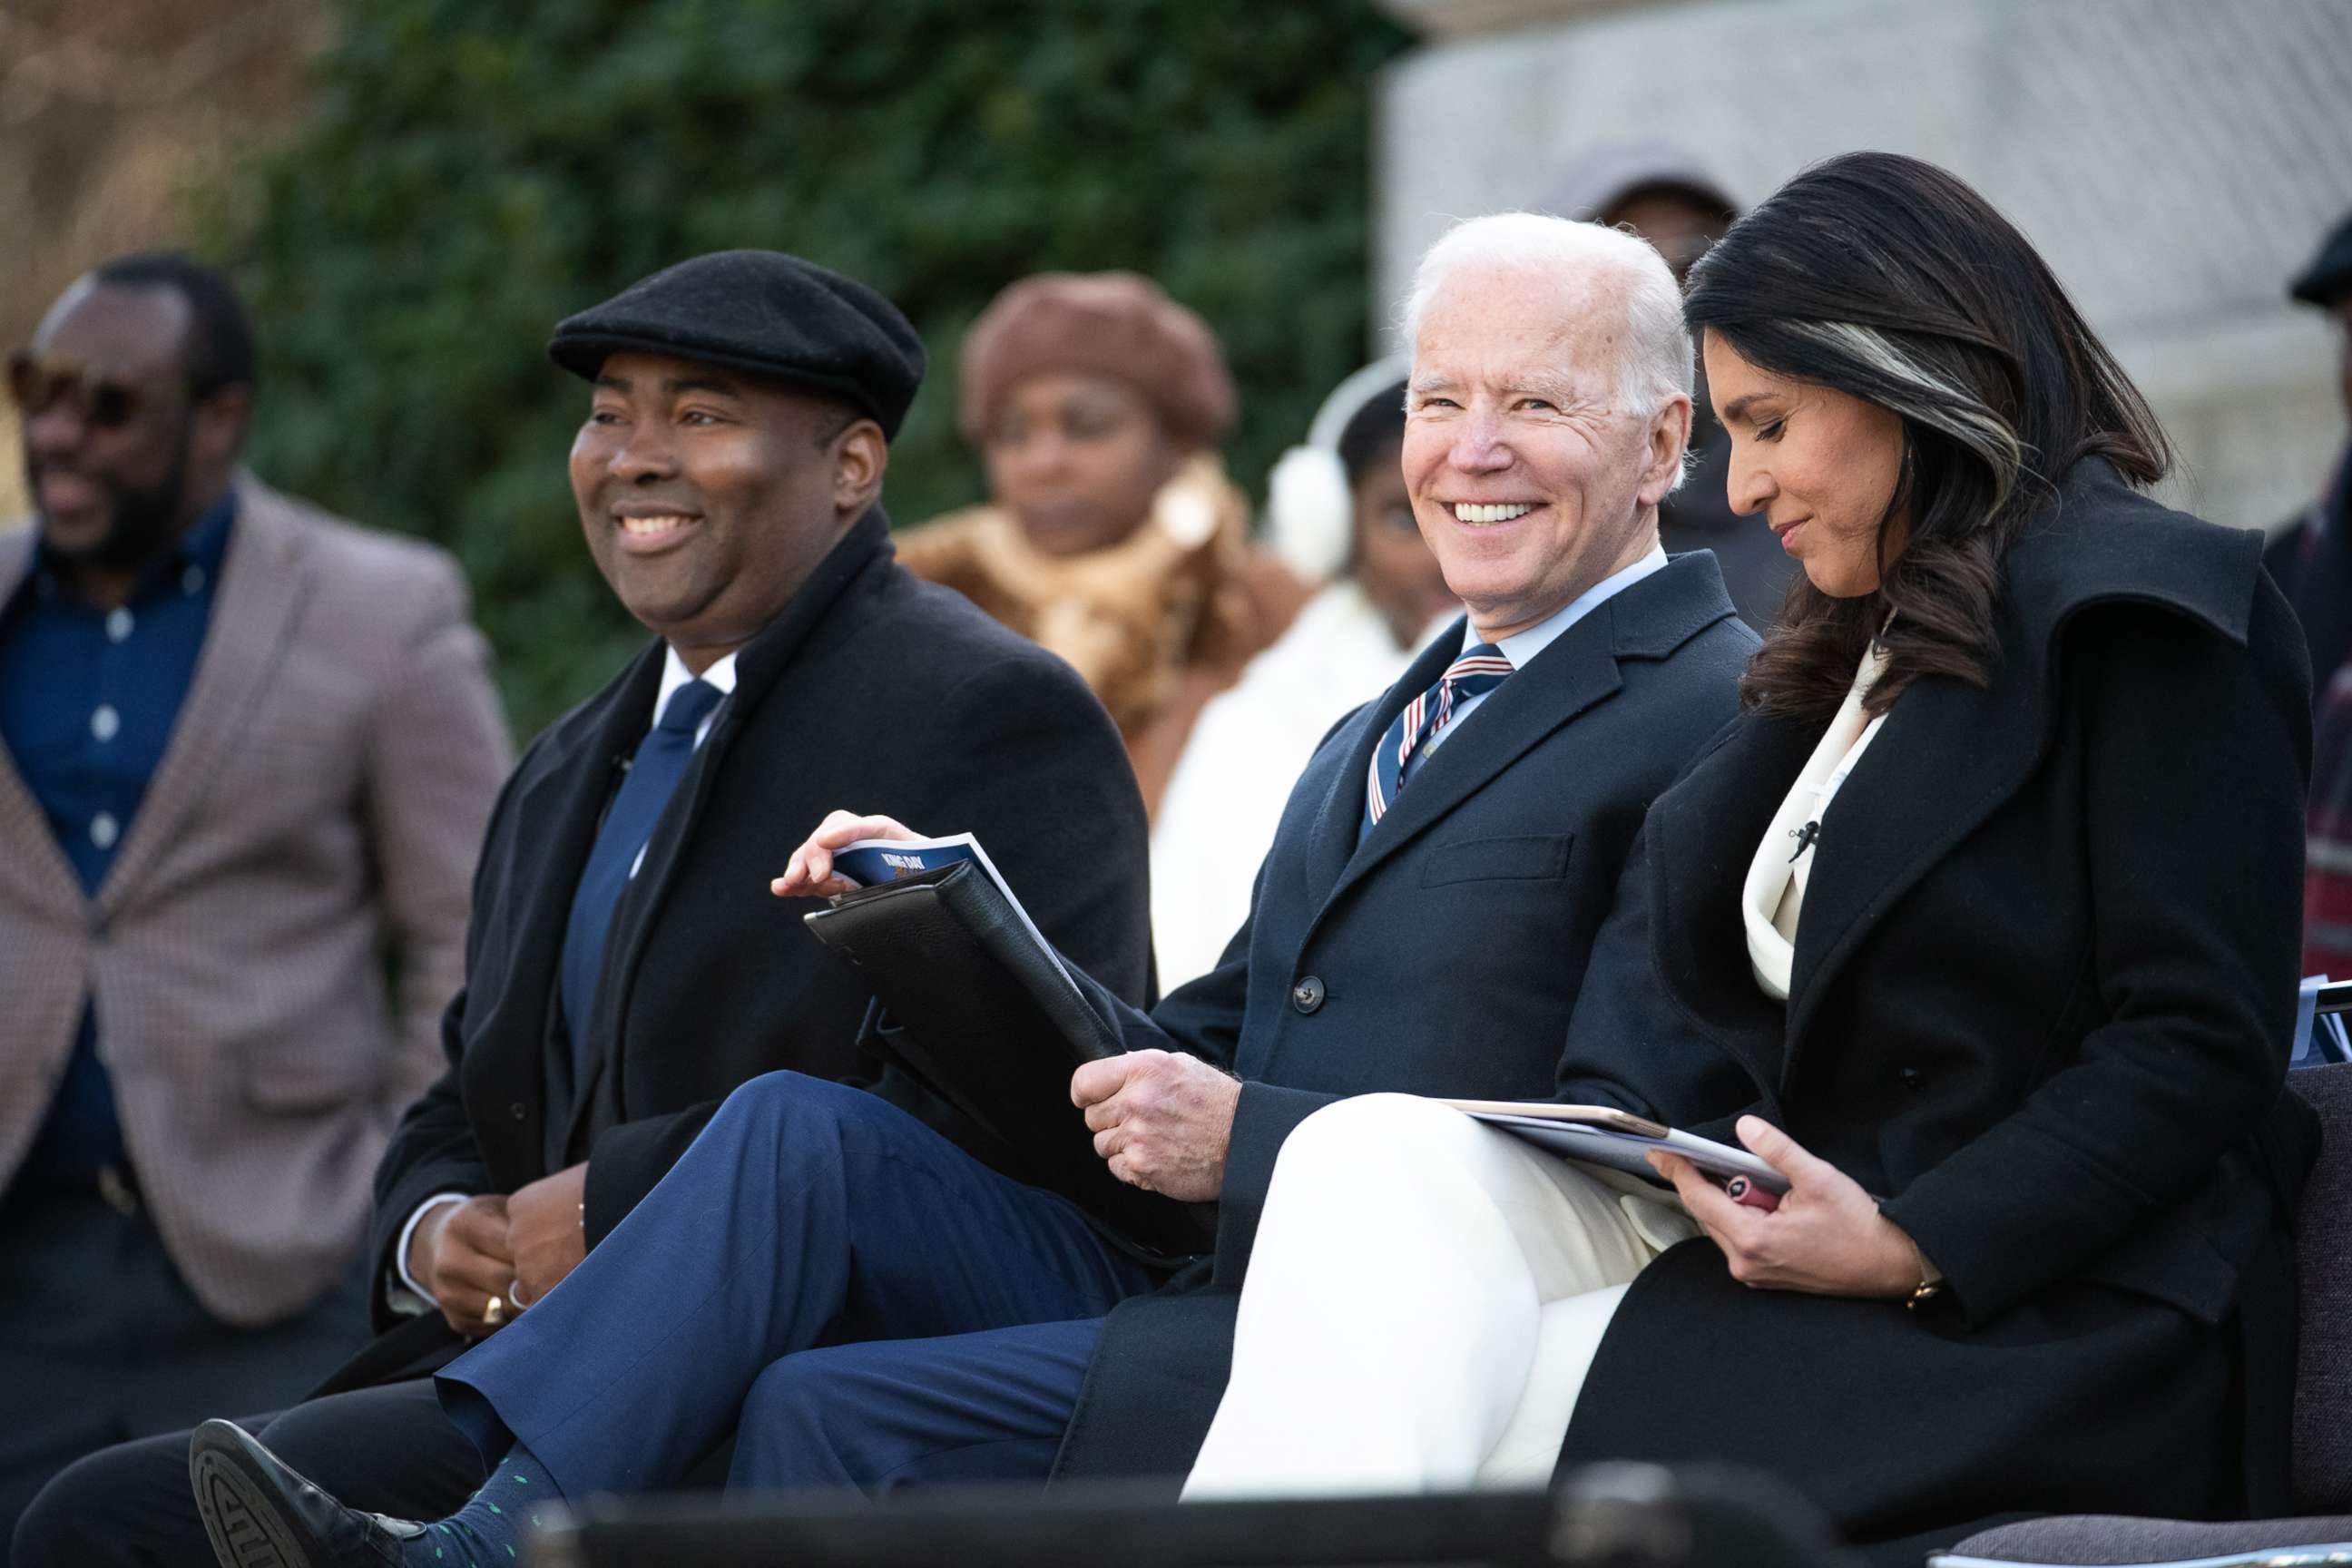 PHOTO: Senate candidate Jamie Harrison, left, sits with Democratic presidential candidates, former Vice President Joe Biden, center, and Rep. Tulsi Gabbard during the King Day celebration at the Dome March and Rally on Jan. 20, 2020, in Columbia, S.C.